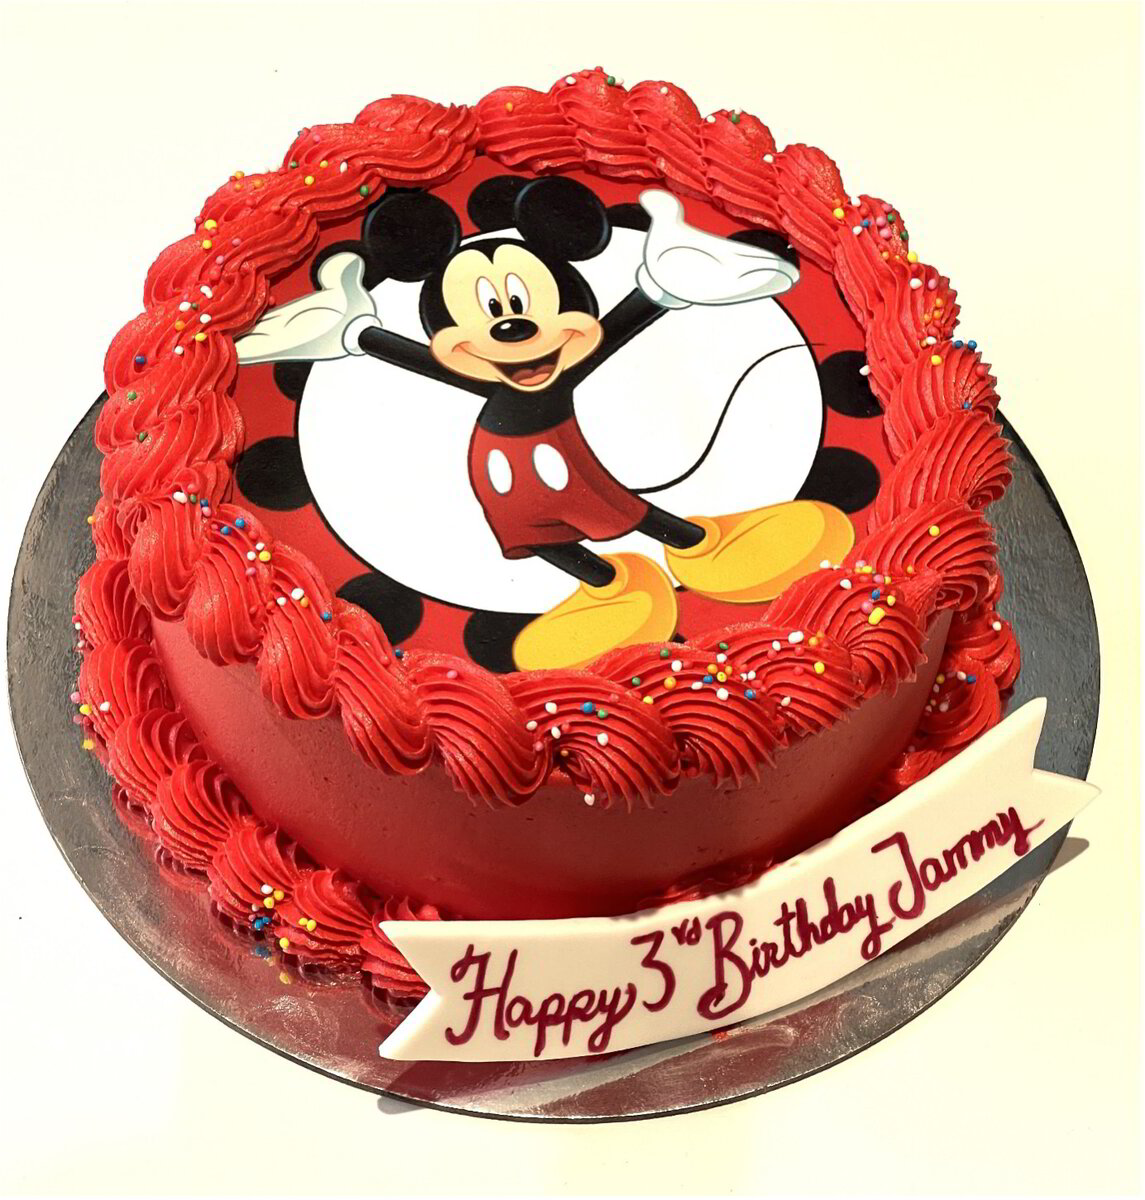 Minnie Mouse Cake - Buy Online, Free Next Day Delivery — New Cakes